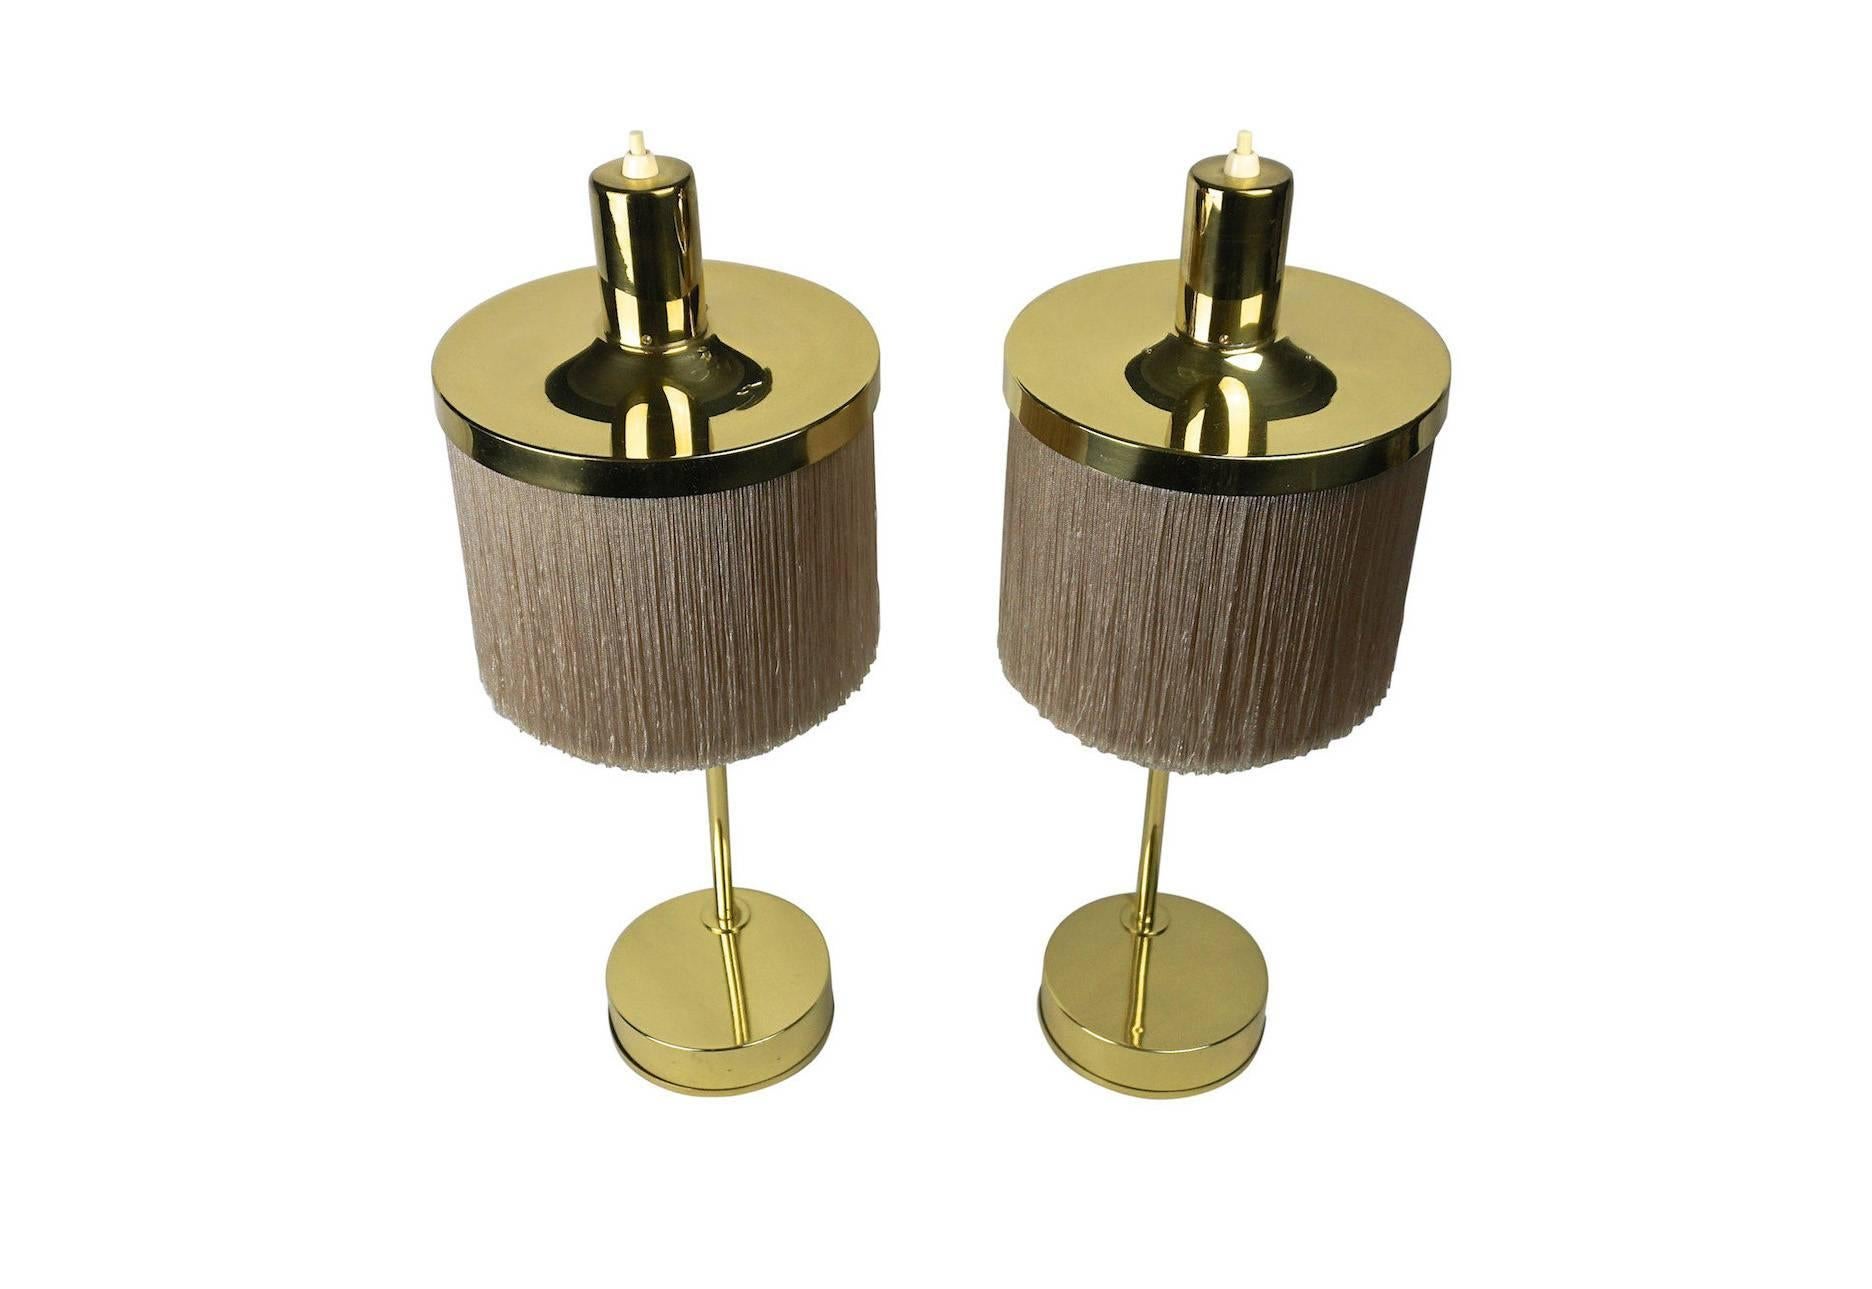 A pair of table lamps model B-140 designed by Hans-Agne Jakobsson, produced by Hans-Agne Jakobsson in Markaryd, Sweden.